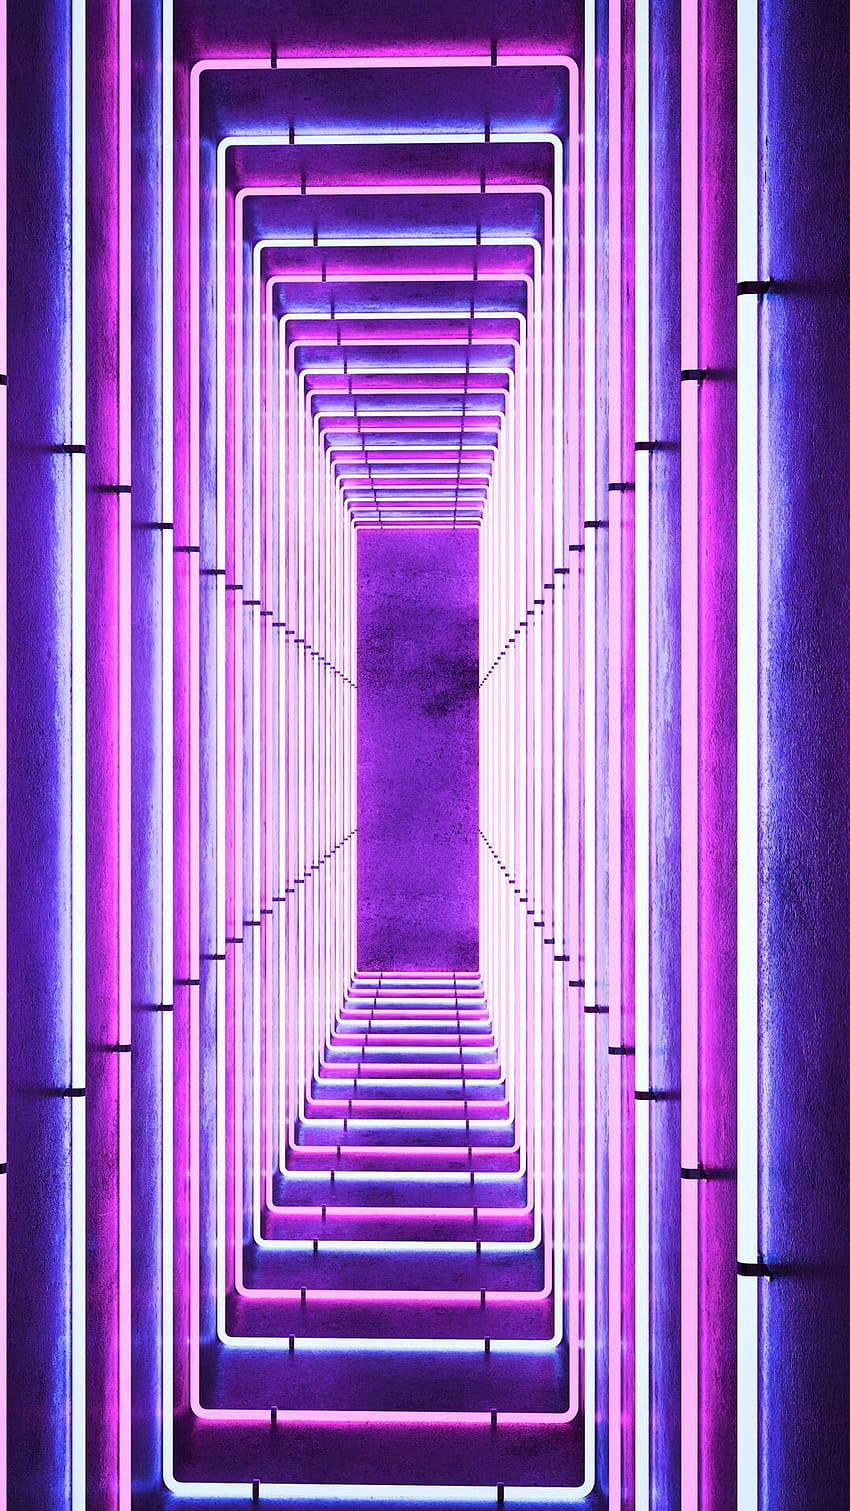 Purple Aesthetic Discover Neon Neon for your iPhone XS from Vibe App in 2020, purple plant tunnel aesthetic ultra HD phone wallpaper